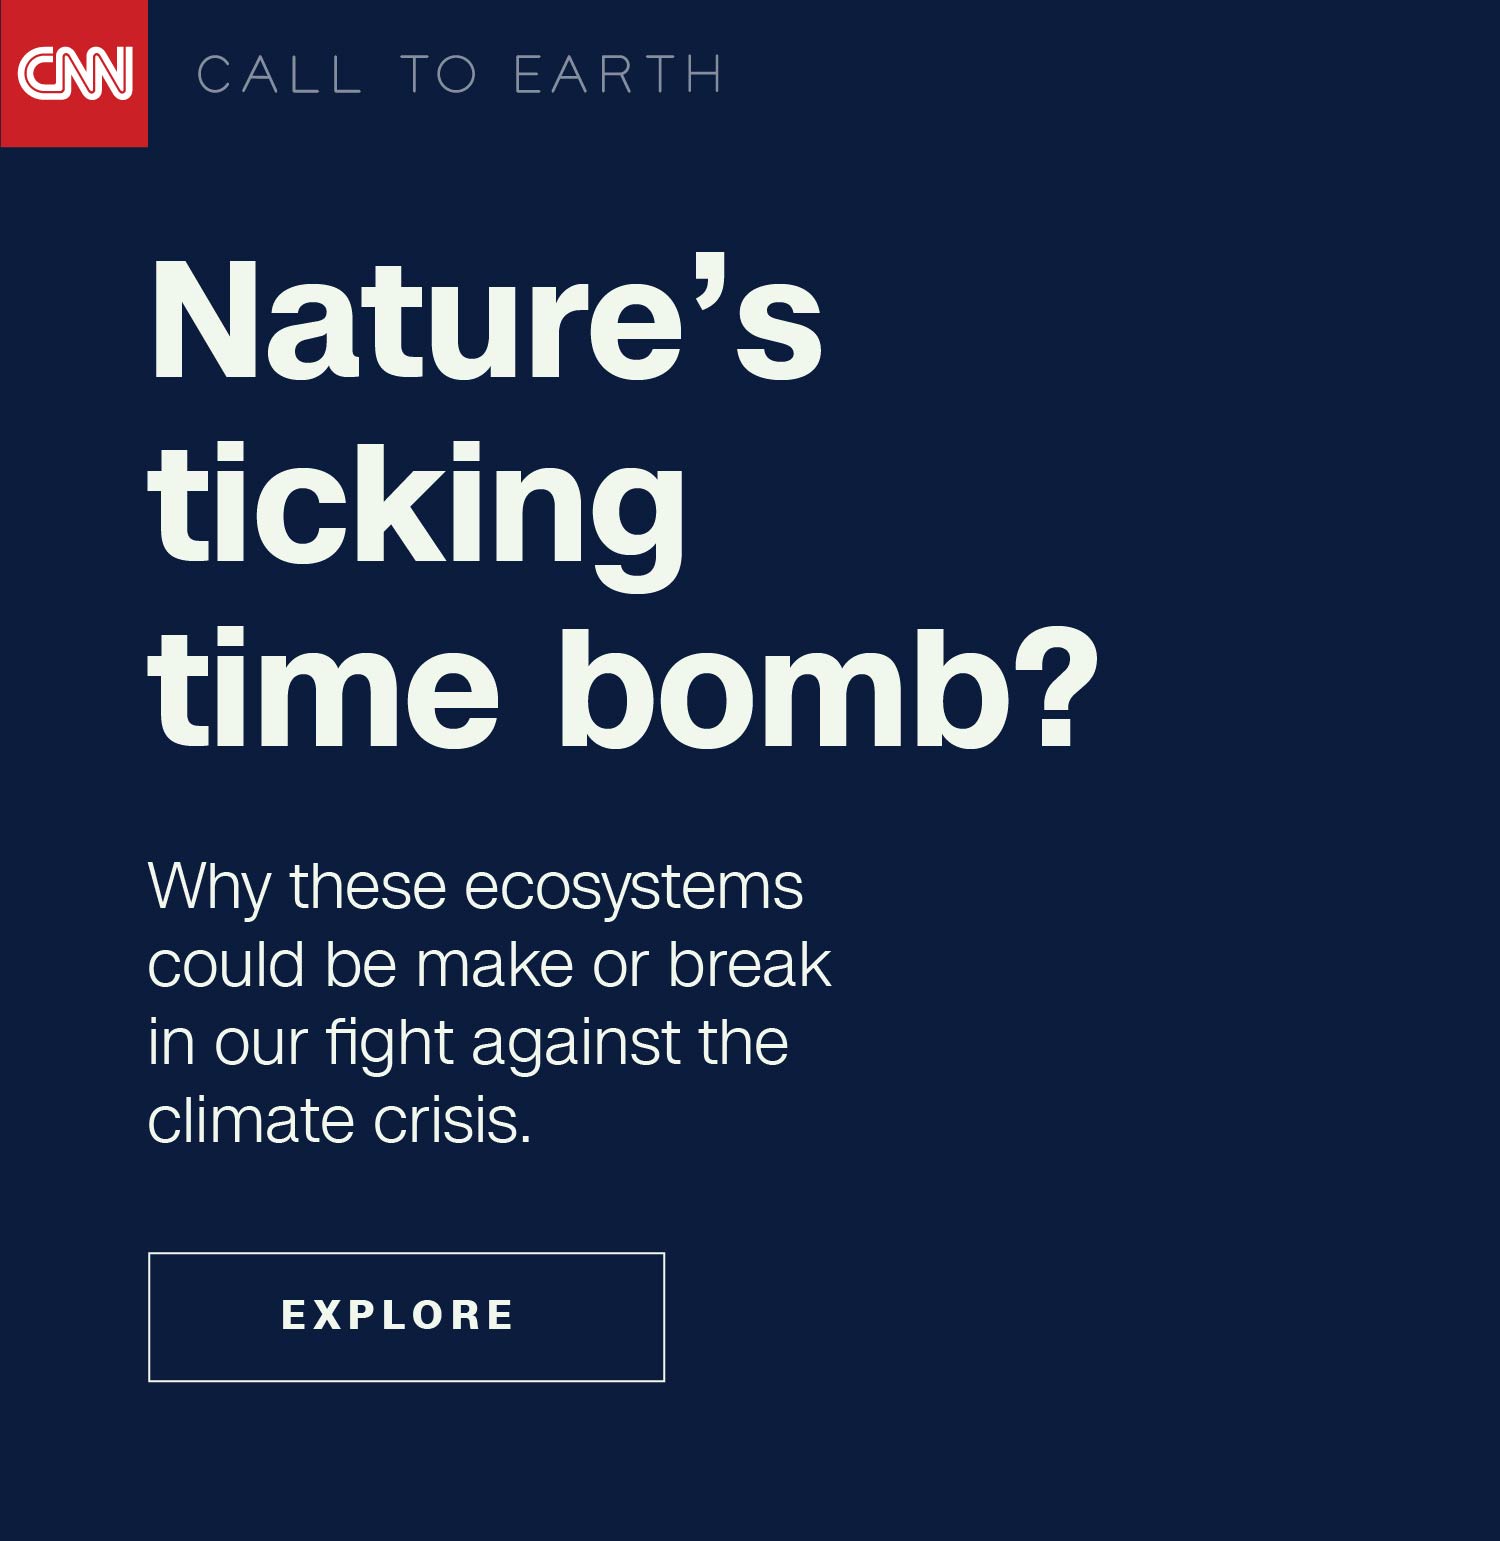 Nature's ticking time bomb?